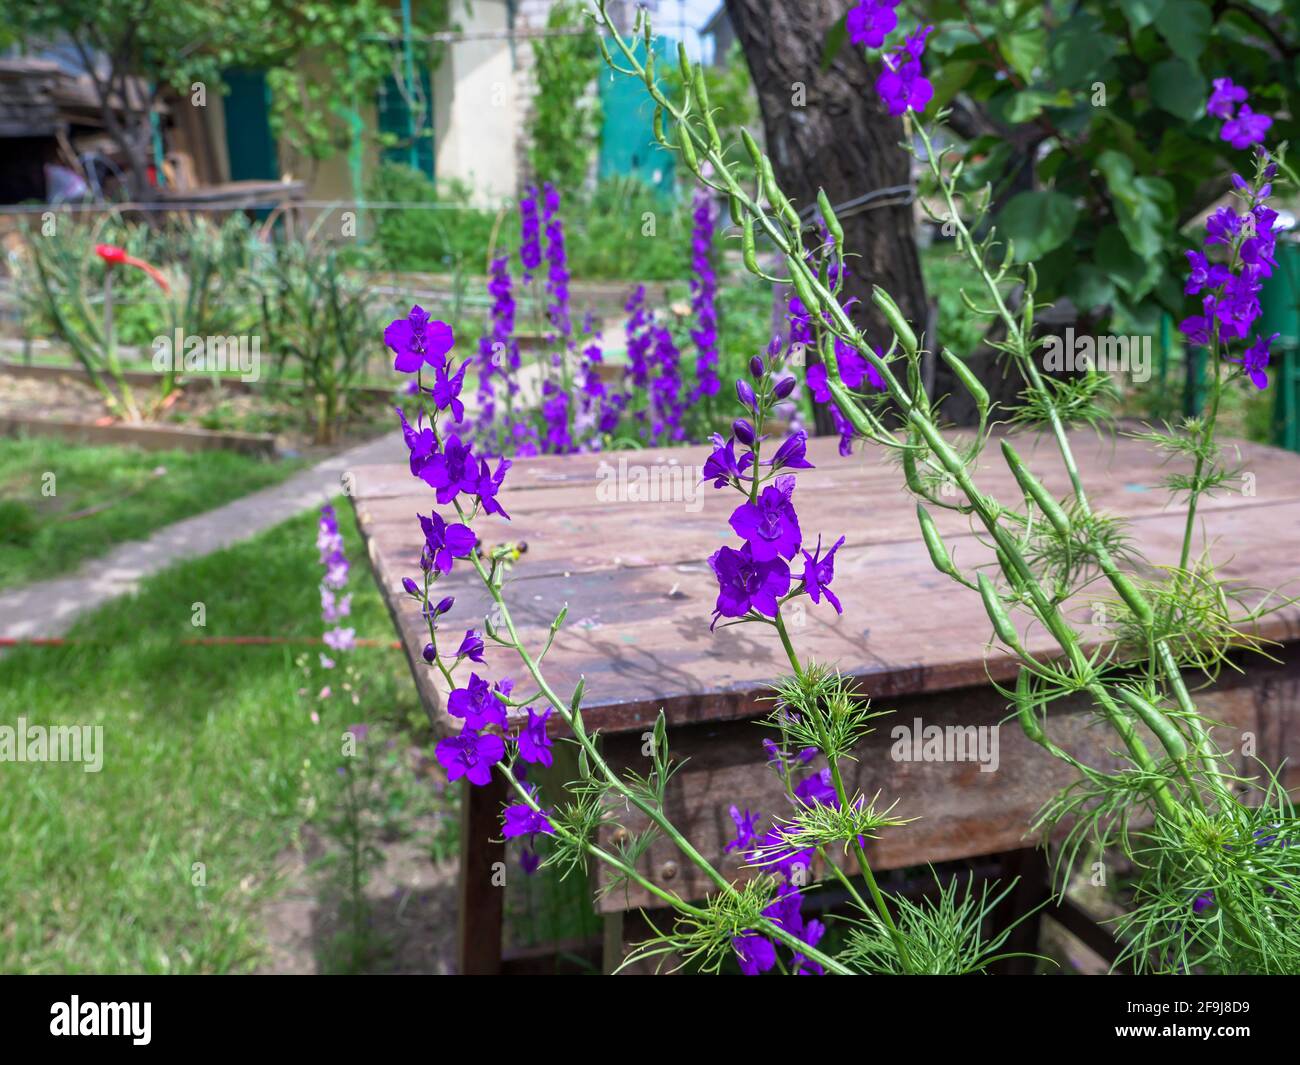 Closeup of a rough red rustic wooden table on the foreground and purple delphinium consolida (Consolida regalis) flowers blooming on the background. Stock Photo